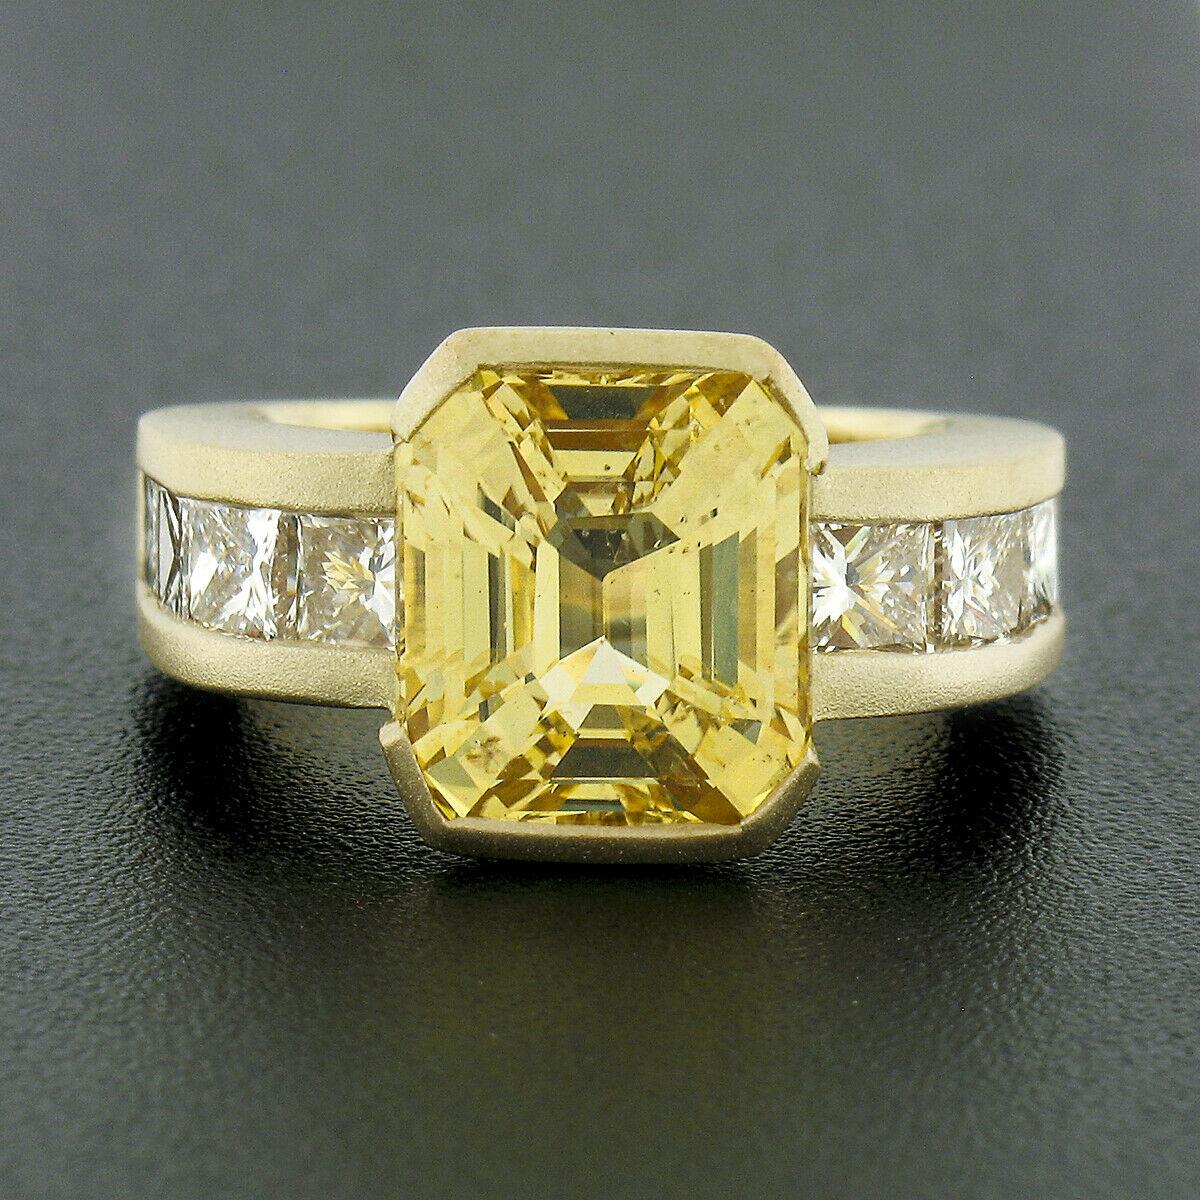 This fancy and unusual yellow sapphire and diamond engagement ring is very well and solidly crafted in solid 18k yellow gold. It features a natural, AGL certified, emerald cut yellow sapphire that weighs exactly 6.04 carats and is perfectly